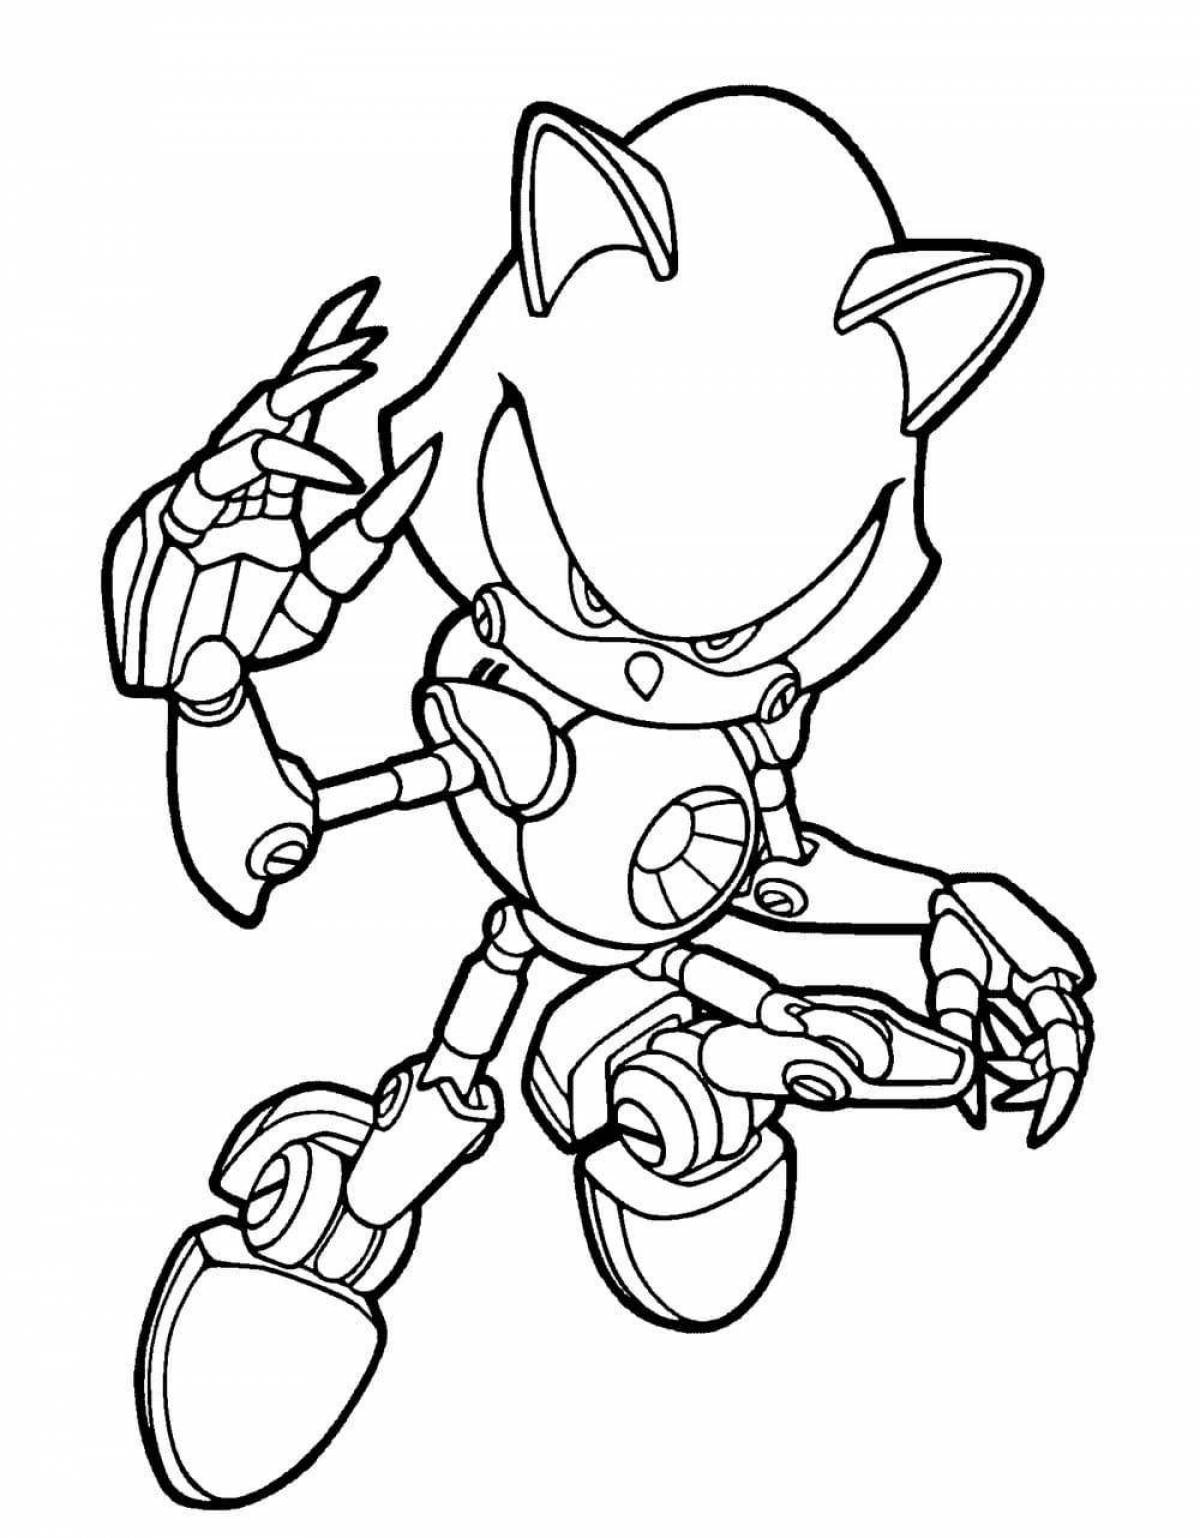 Sonic robot playful coloring